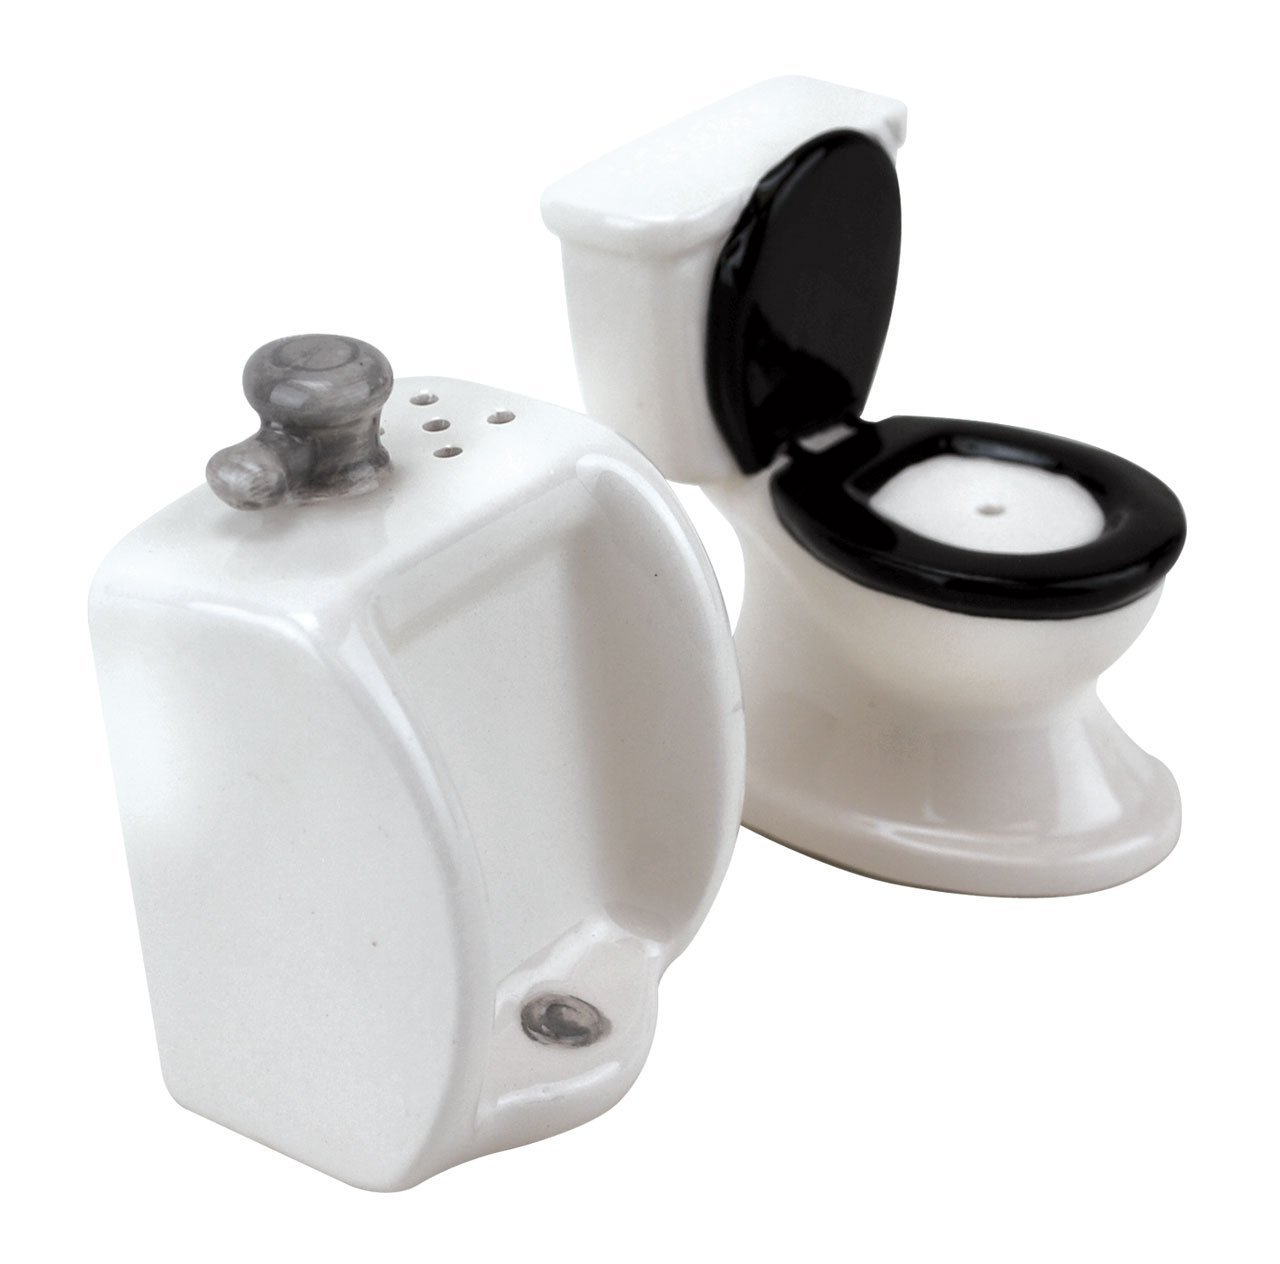 Toilet and Urinal Shaker